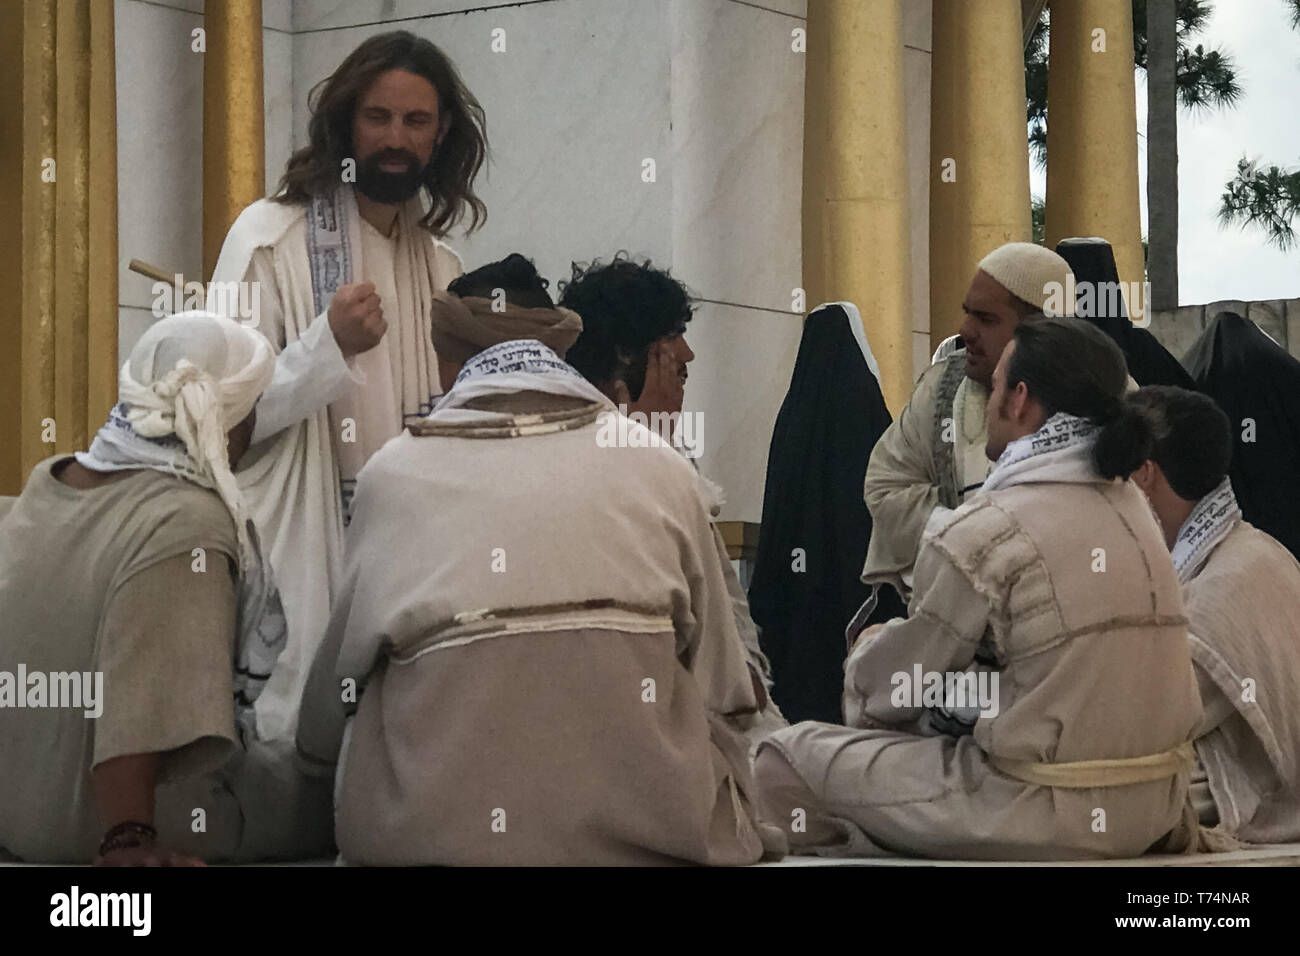 Orlando, Florida, USA. 3rd May, 2019. An actor portraying Jesus in the Holy Land Experience (HLE) performance of ''Jesus At The Temple'' speaks to his followers in Orlando, Florida. The HLE theme park, owned by the Trinity Broadcasting Network, recreates the architecture and themes of the ancient city of Jerusalem in 1st-century Judea. HLE is a non-denominational Christian living biblical museum and church. Performers give multiple religious-themed shows in various venues throughout the park each day. Credit: Tracy Barbutes/ZUMA Wire/Alamy Live News Stock Photo